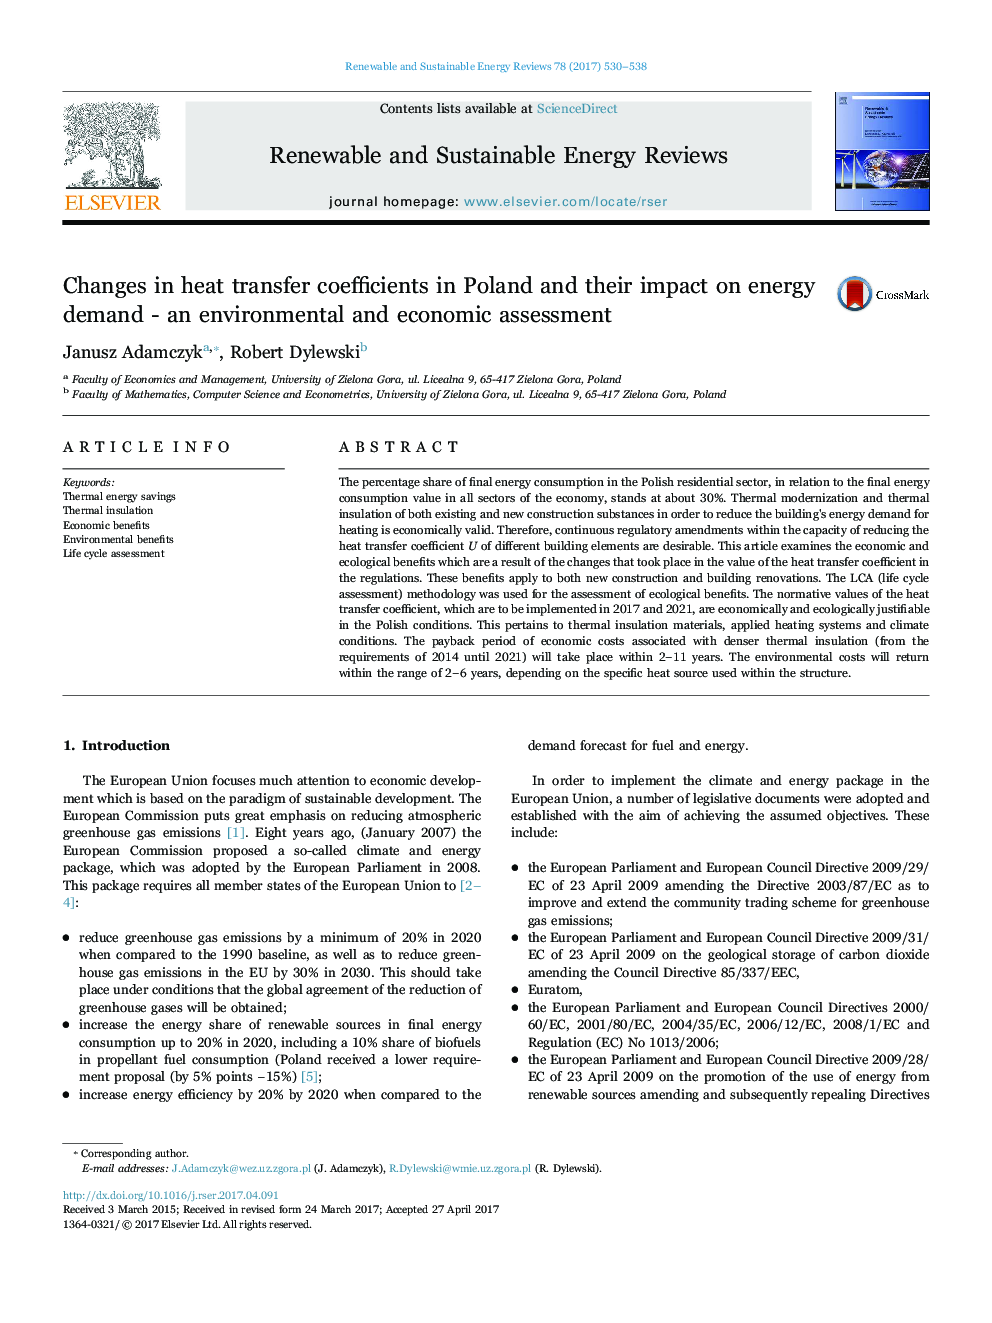 Changes in heat transfer coefficients in Poland and their impact on energy demand - an environmental and economic assessment